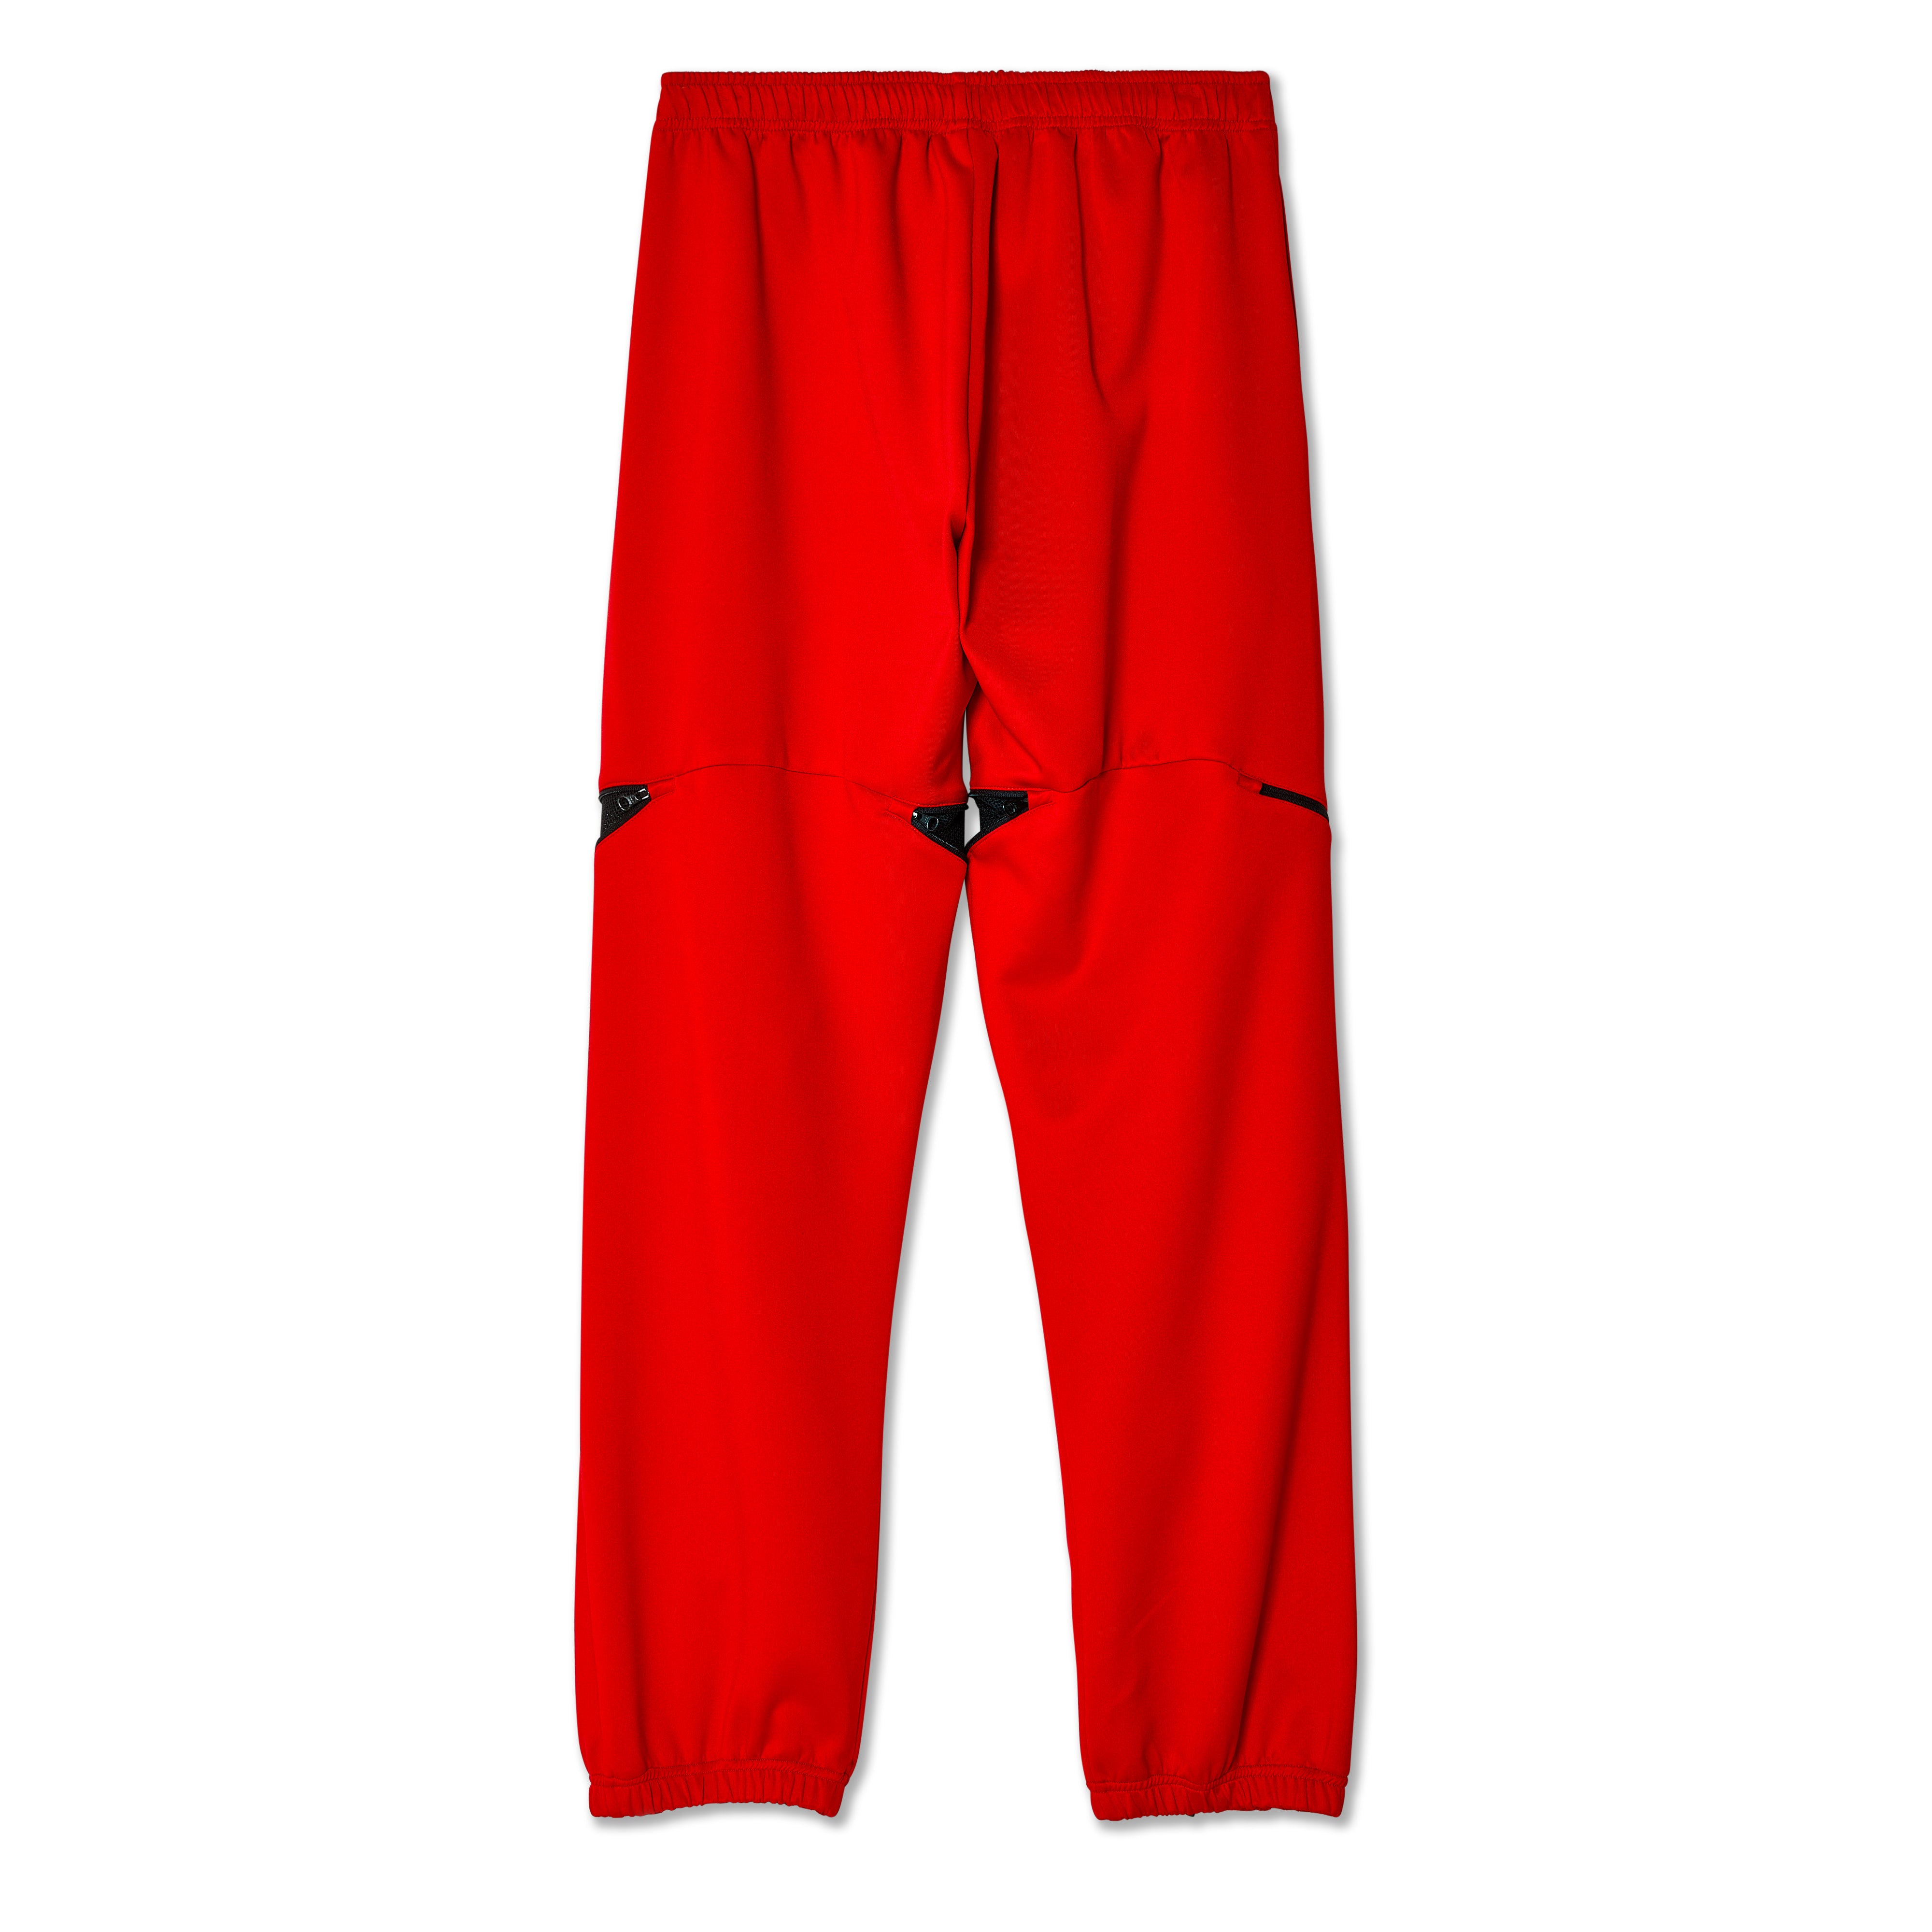 2021 Lowest Price] Nike Womens Track Pants Price in India & Specifications